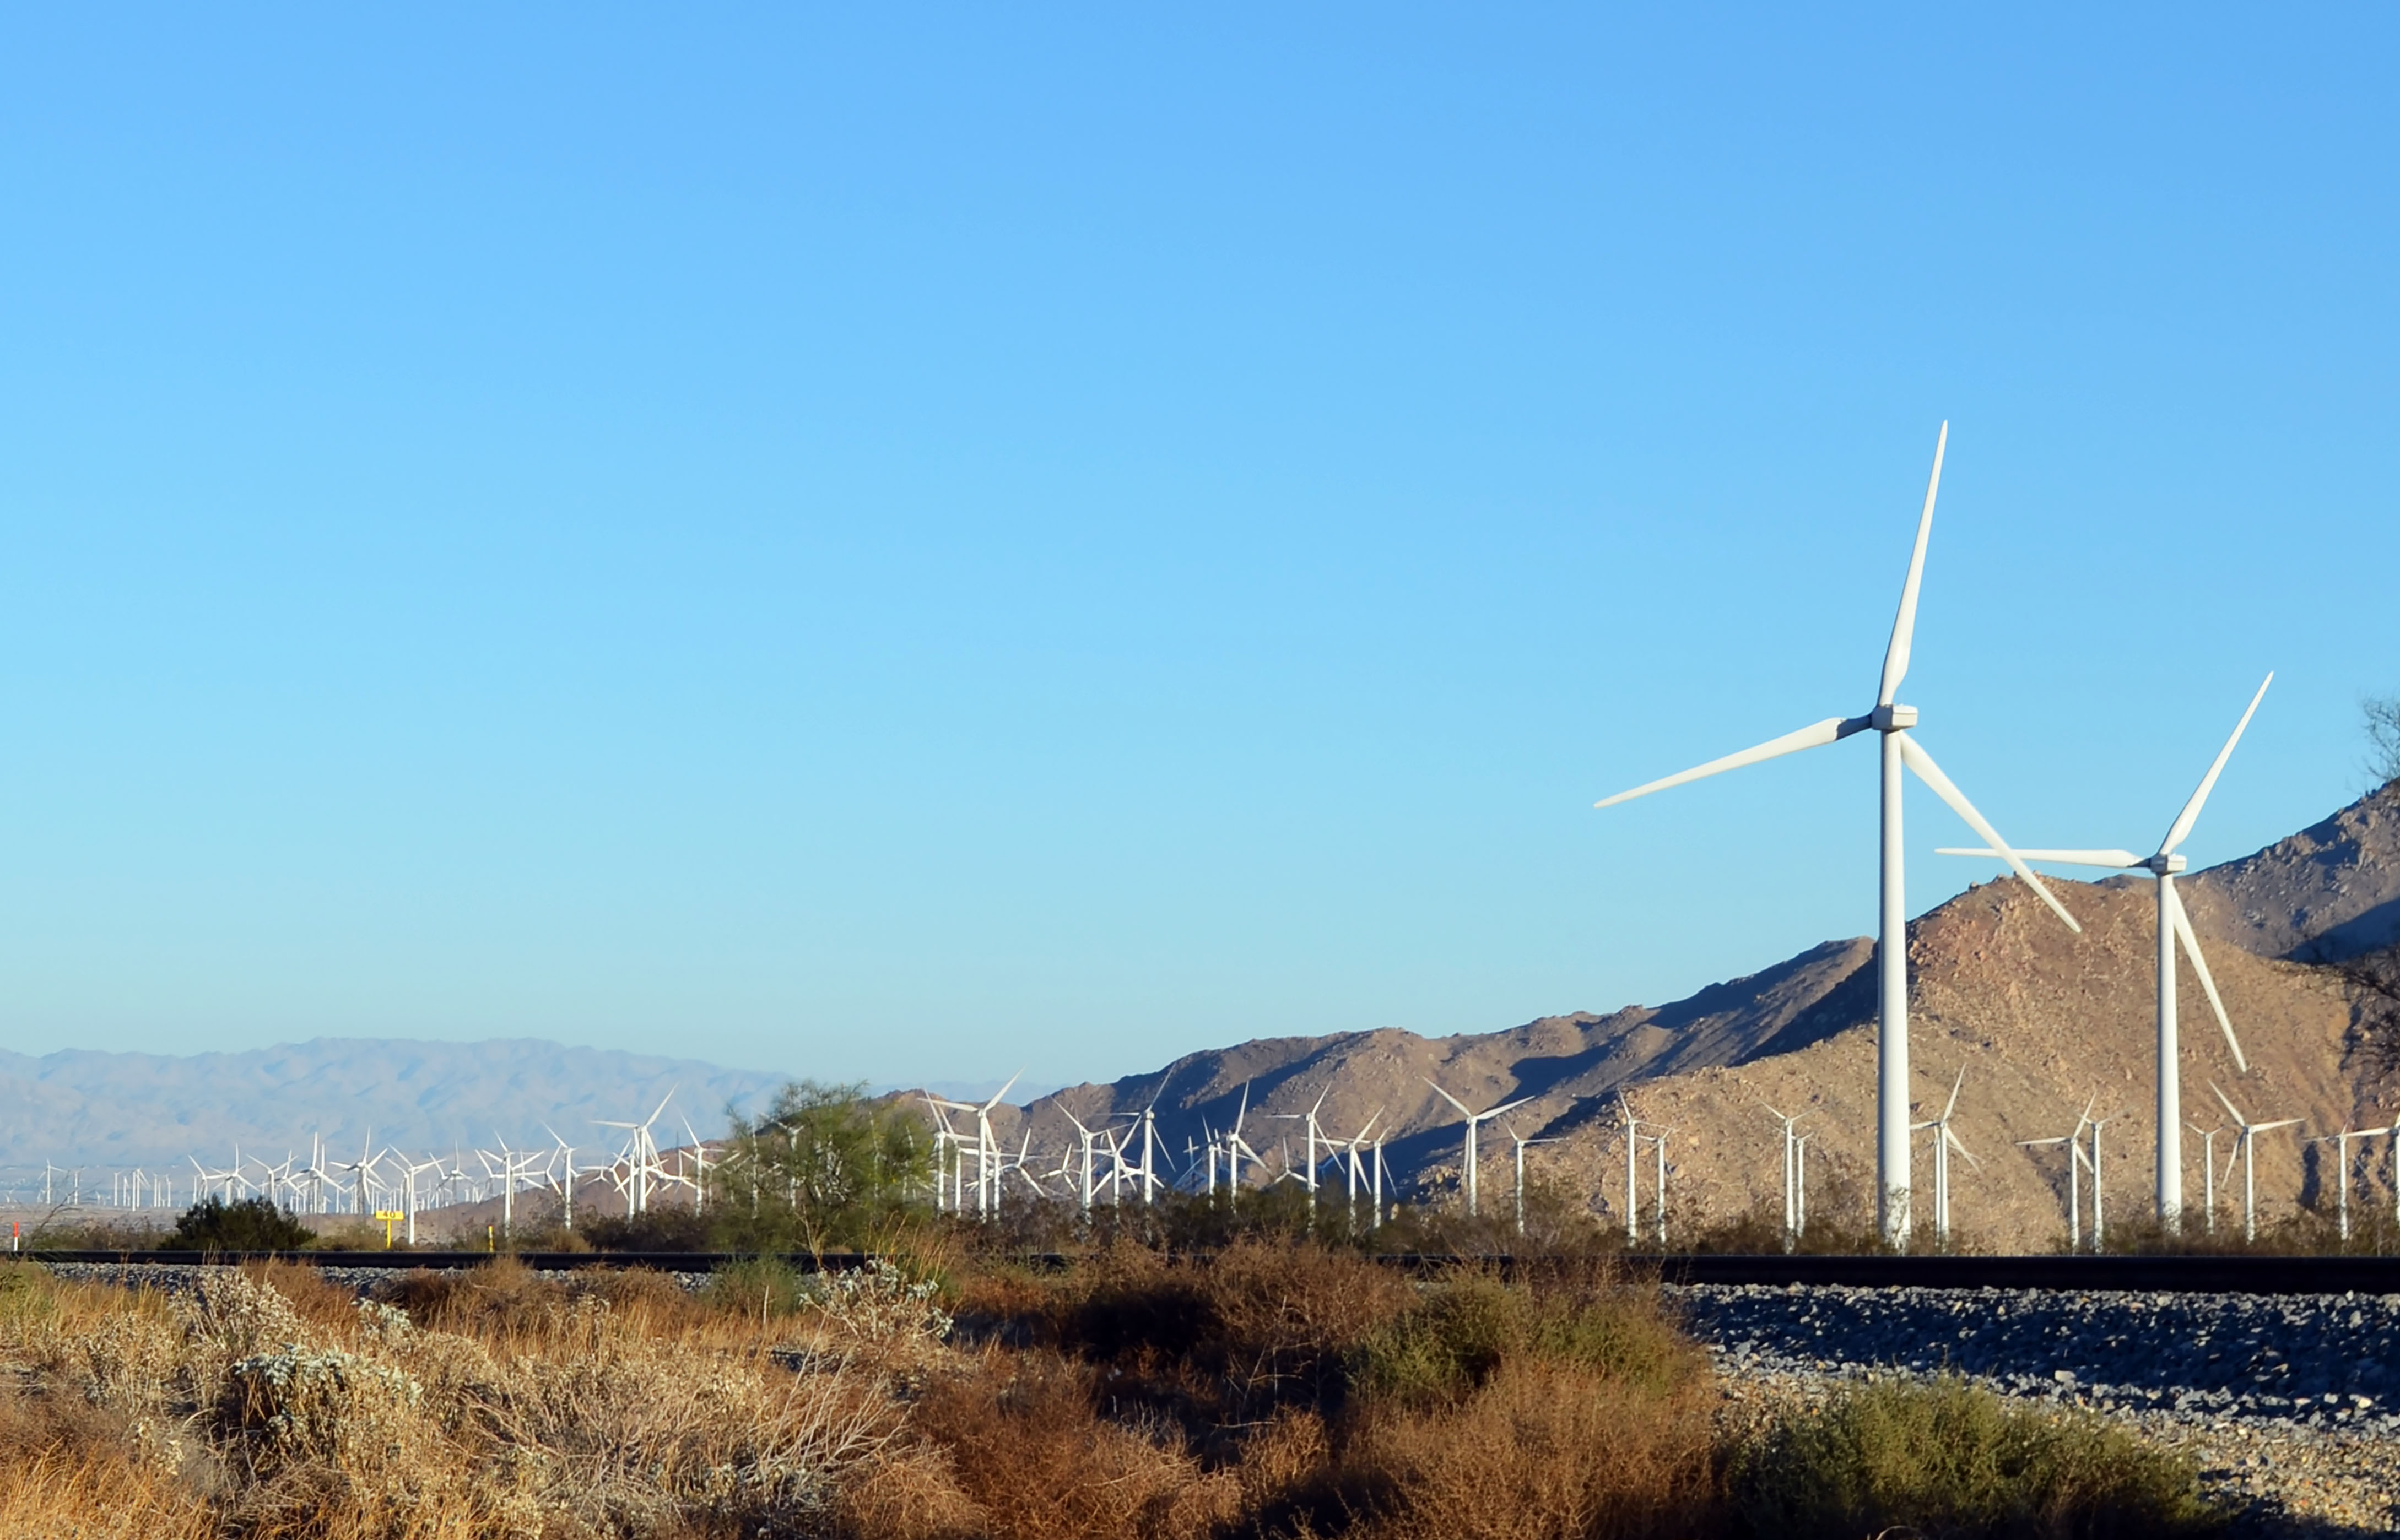 Wind farms running parallel to mountain range.